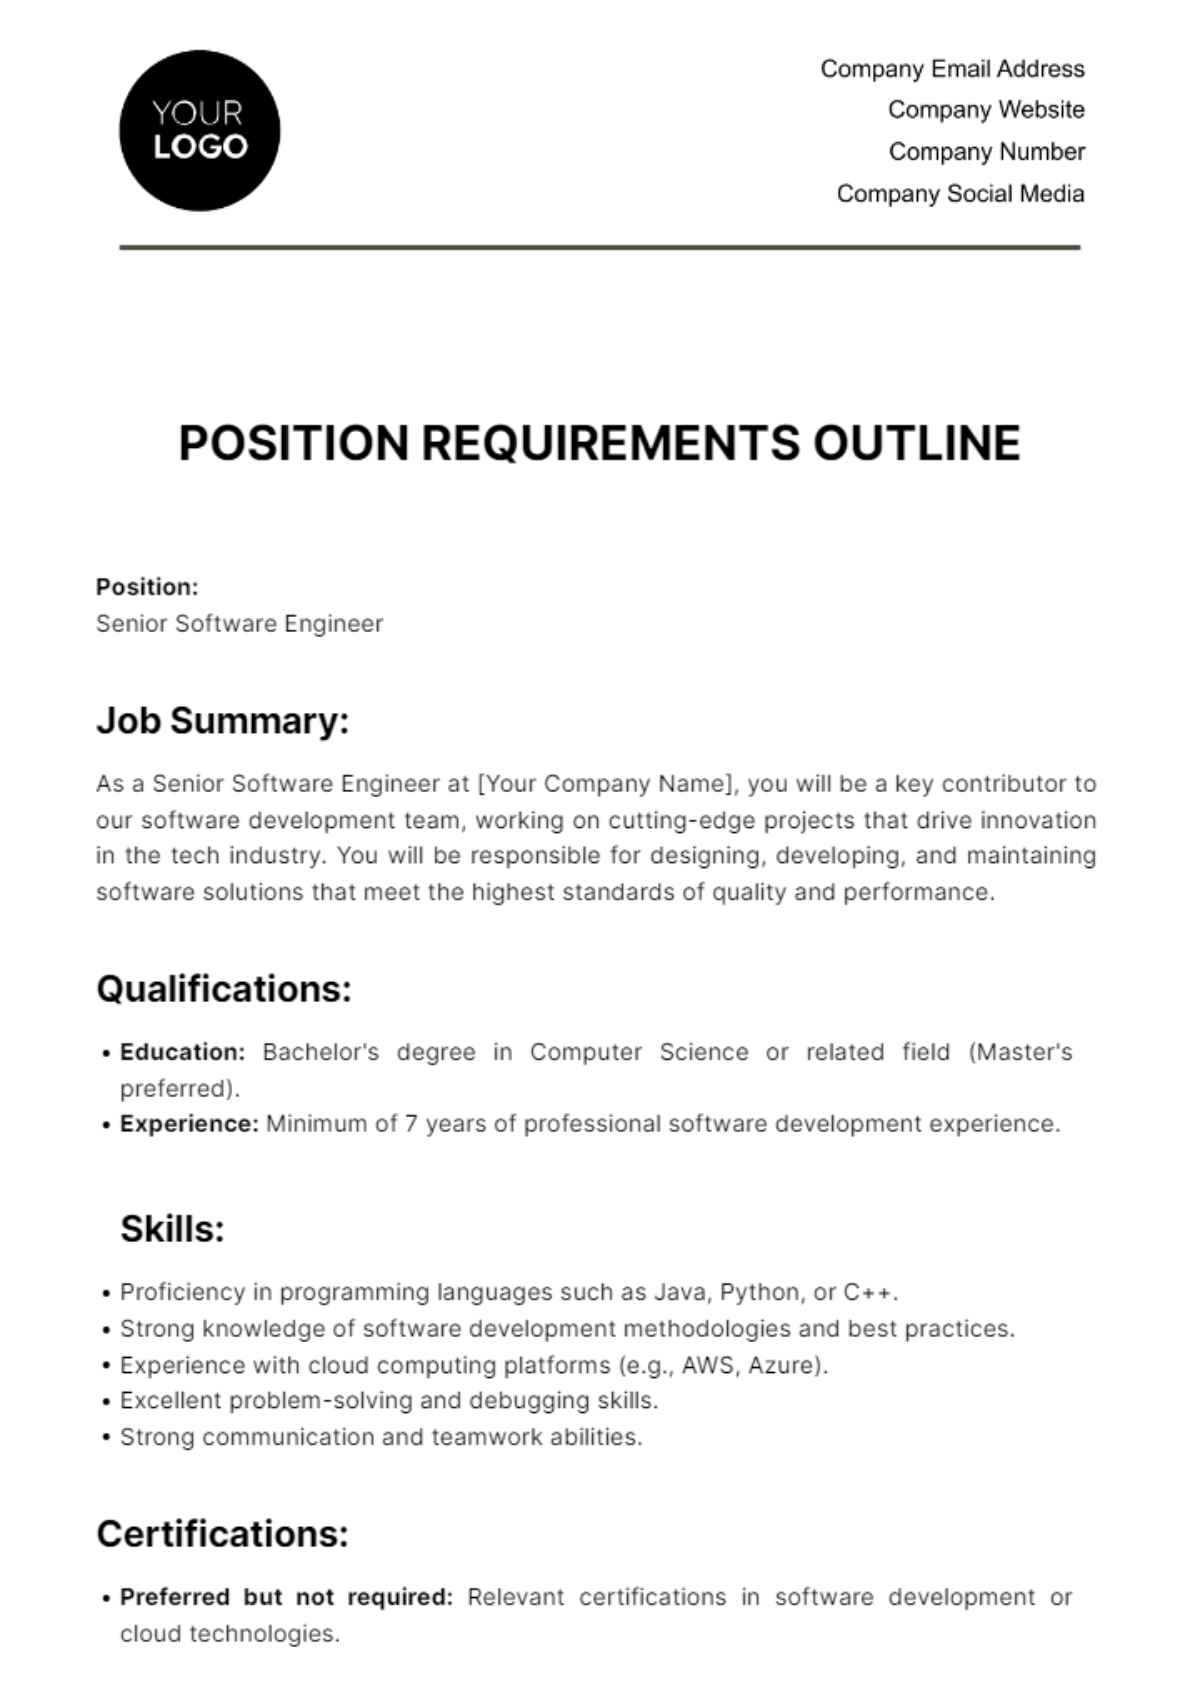 Position Requirements Outline HR Template